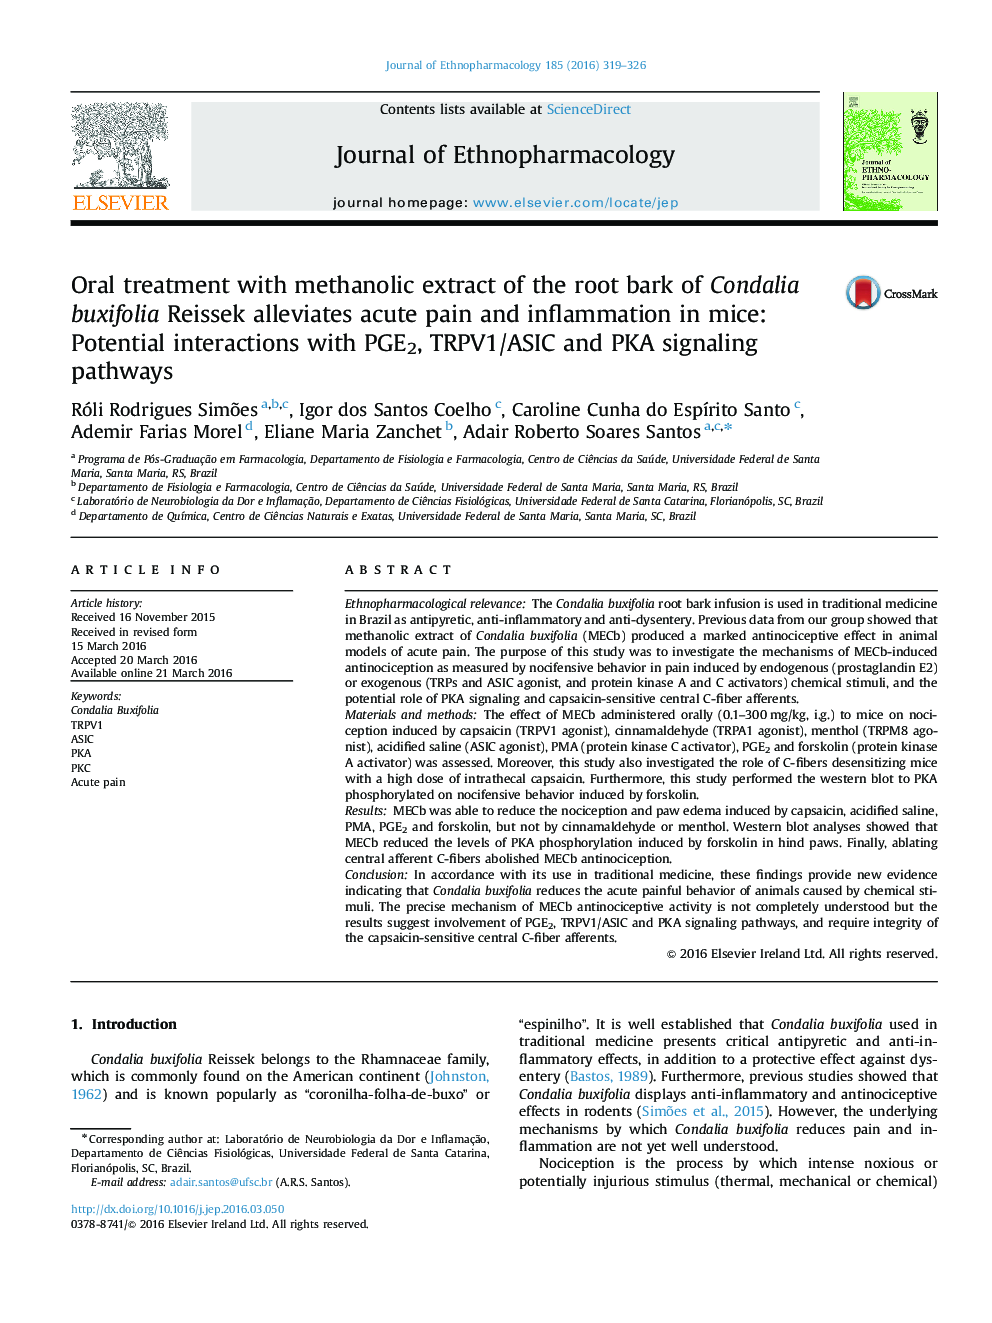 Oral treatment with methanolic extract of the root bark of Condalia buxifolia Reissek alleviates acute pain and inflammation in mice: Potential interactions with PGE2, TRPV1/ASIC and PKA signaling pathways